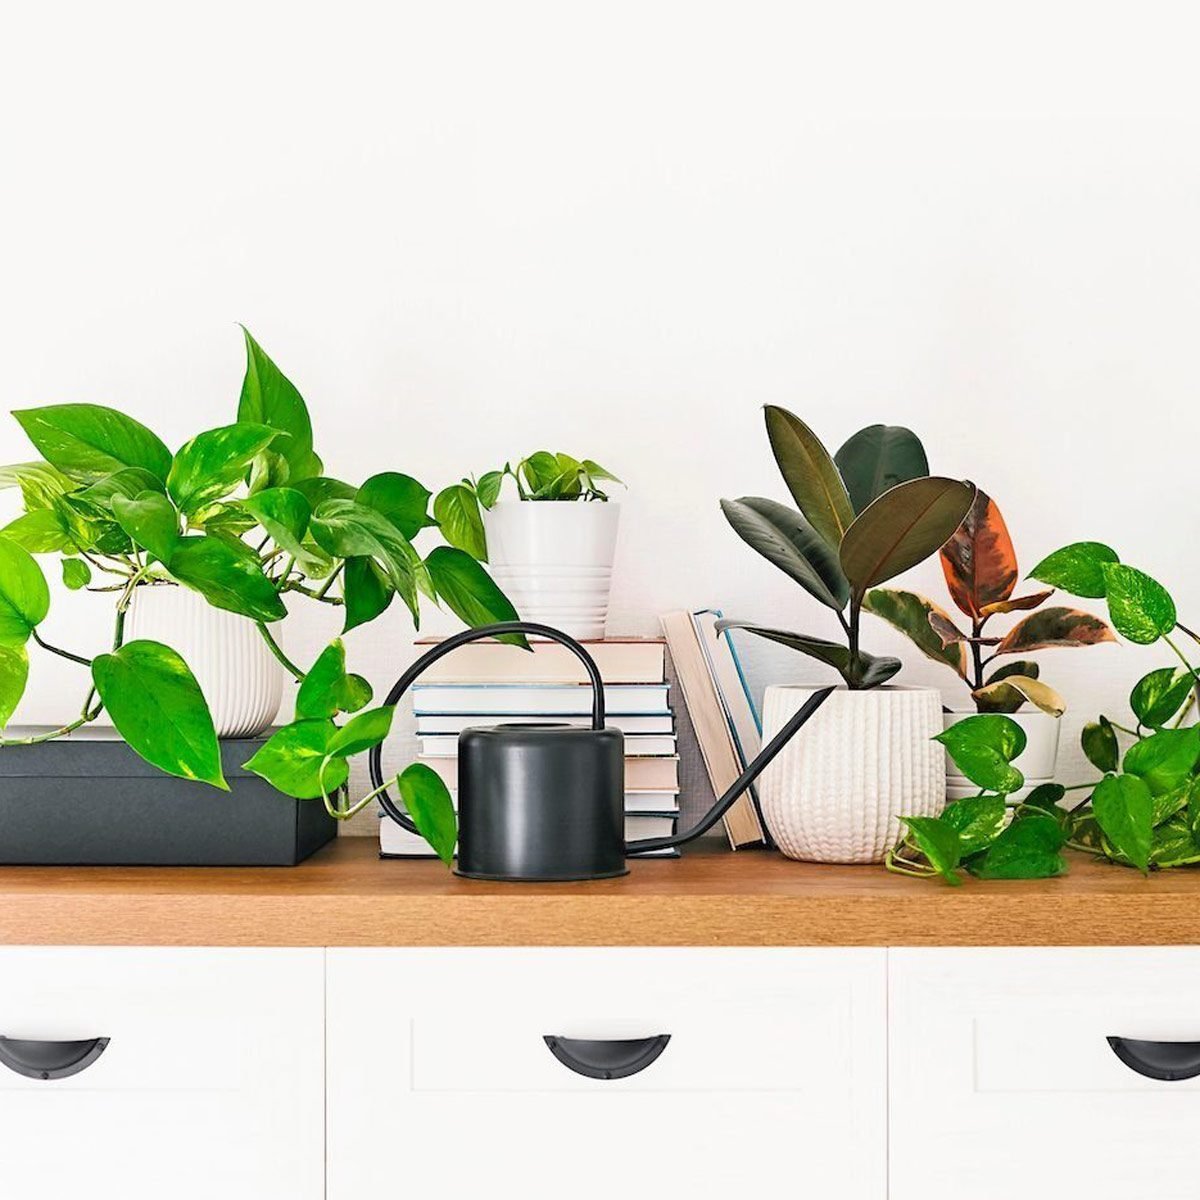 How to Get Rid of Indoor Plant Bugs